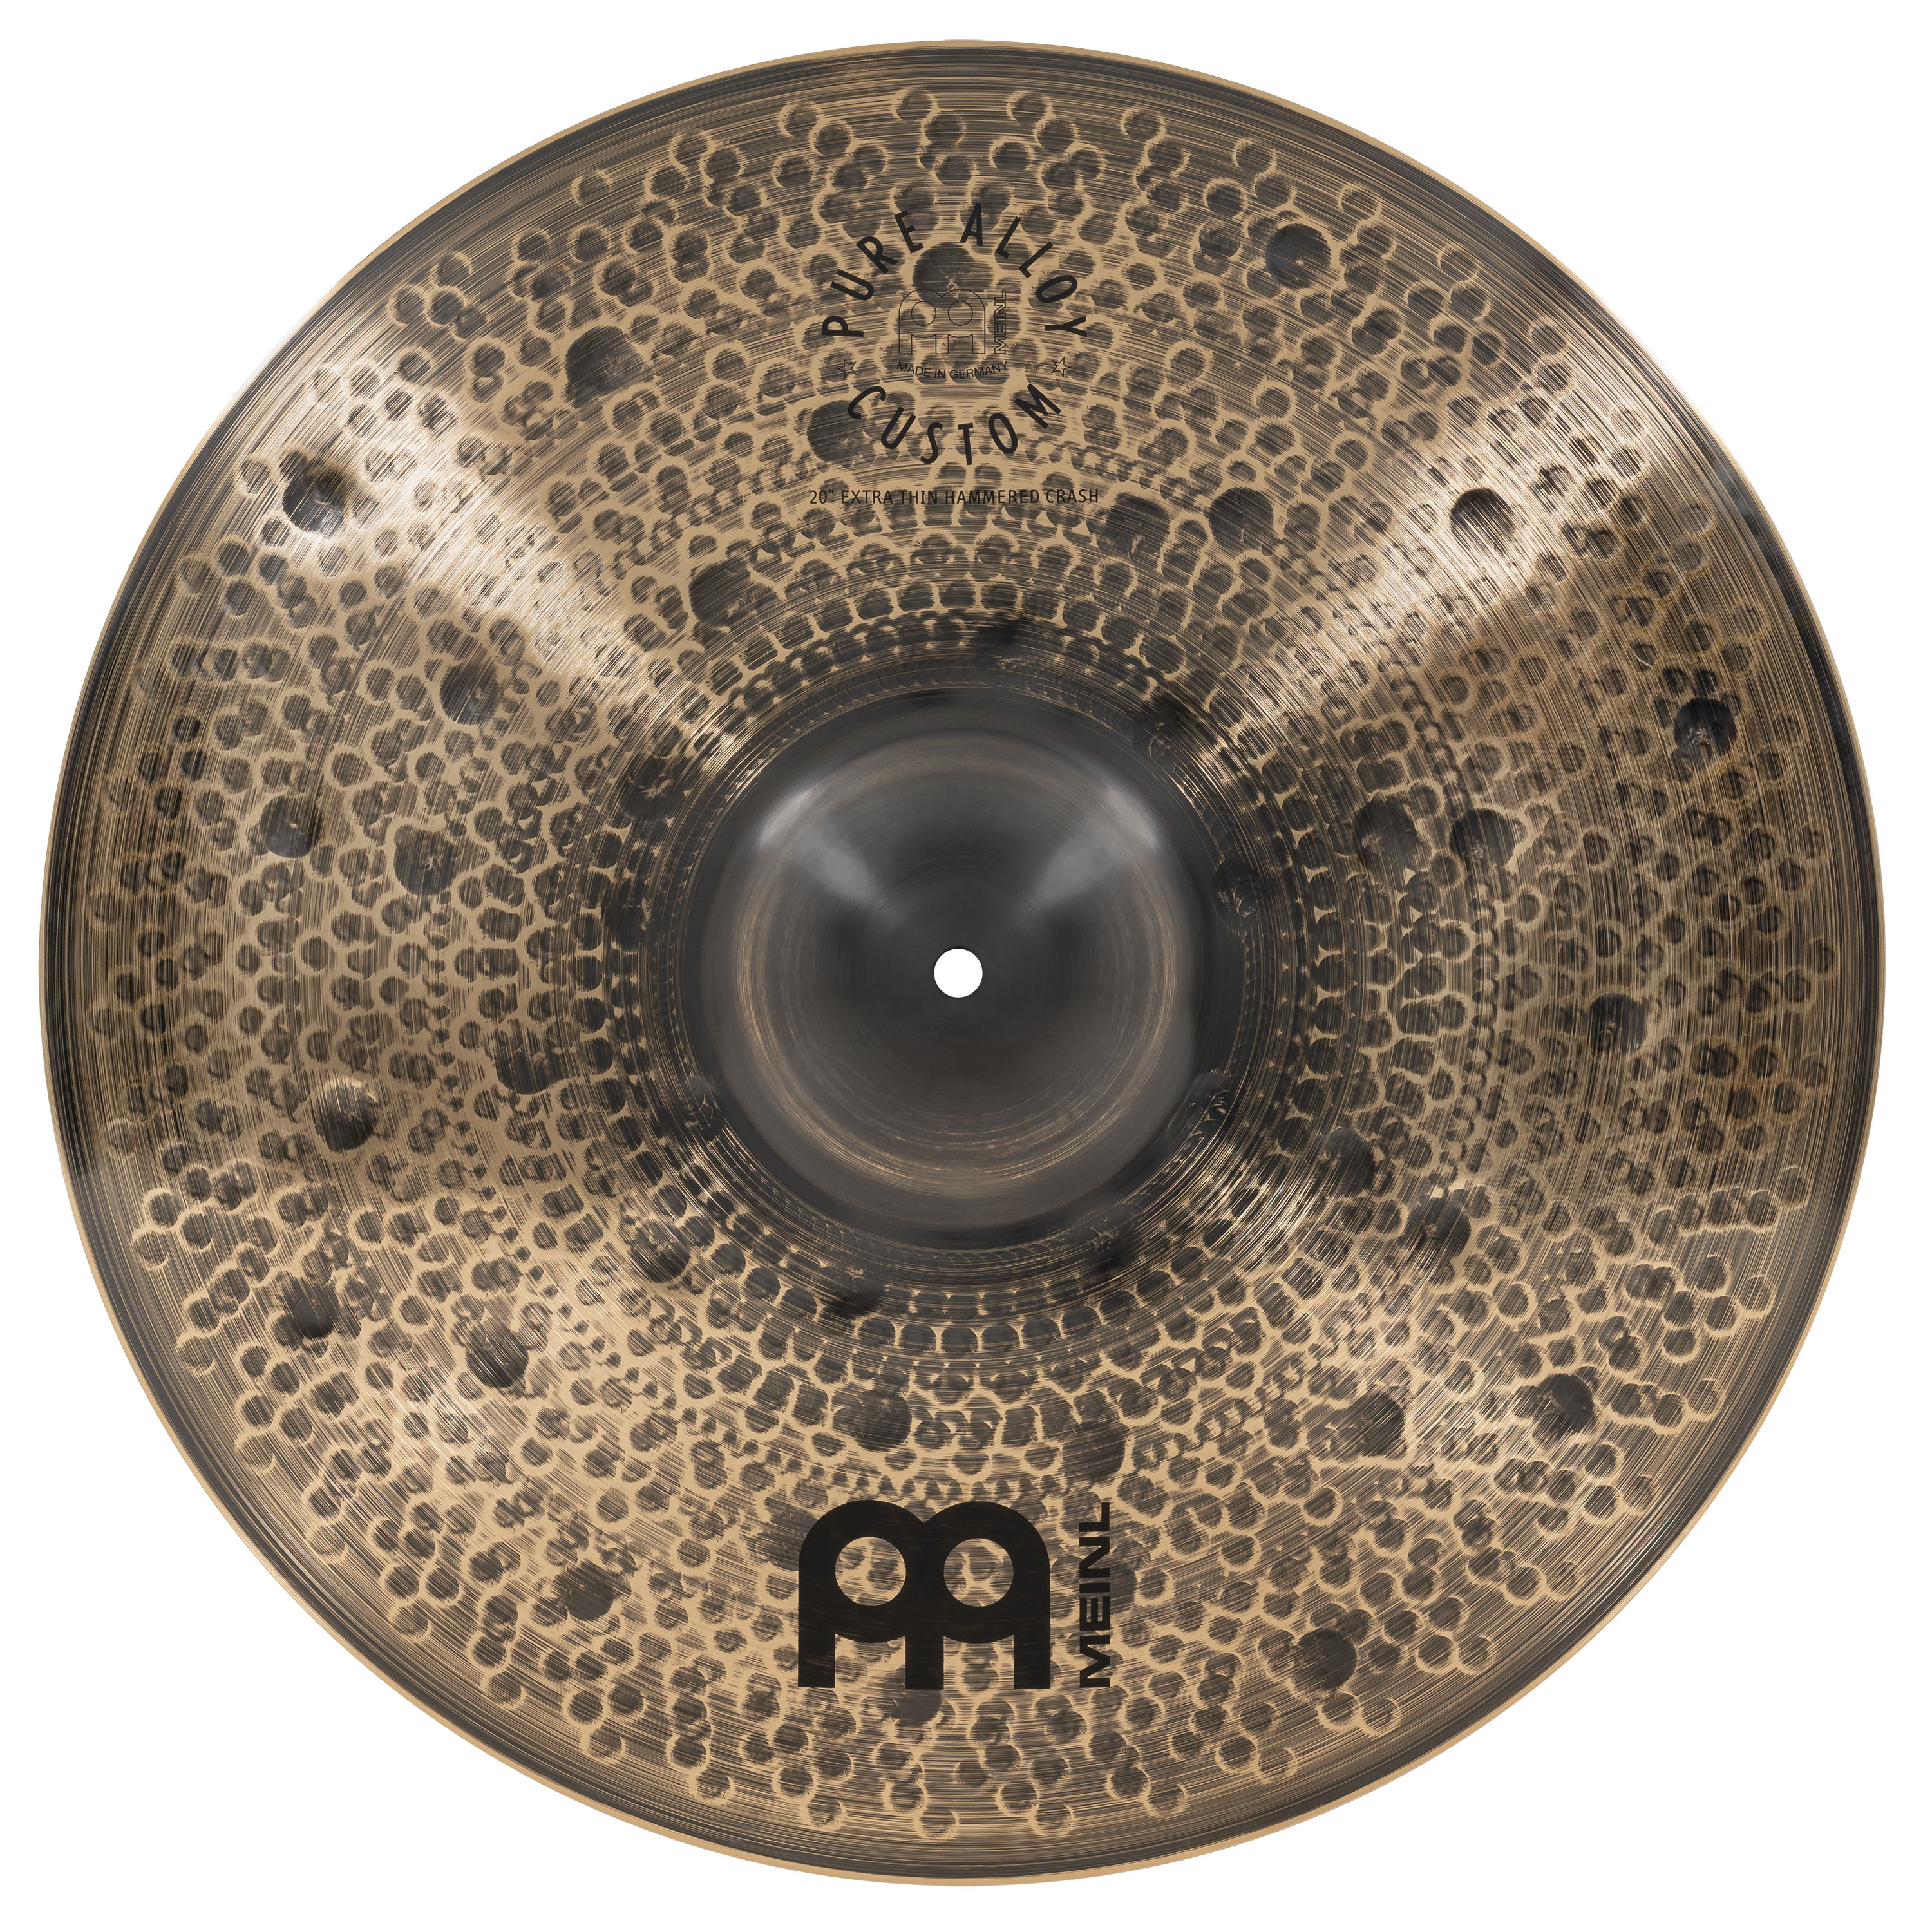 An image of Meinl 20 Pure Alloy Custom Extra Thin Hammered Crash